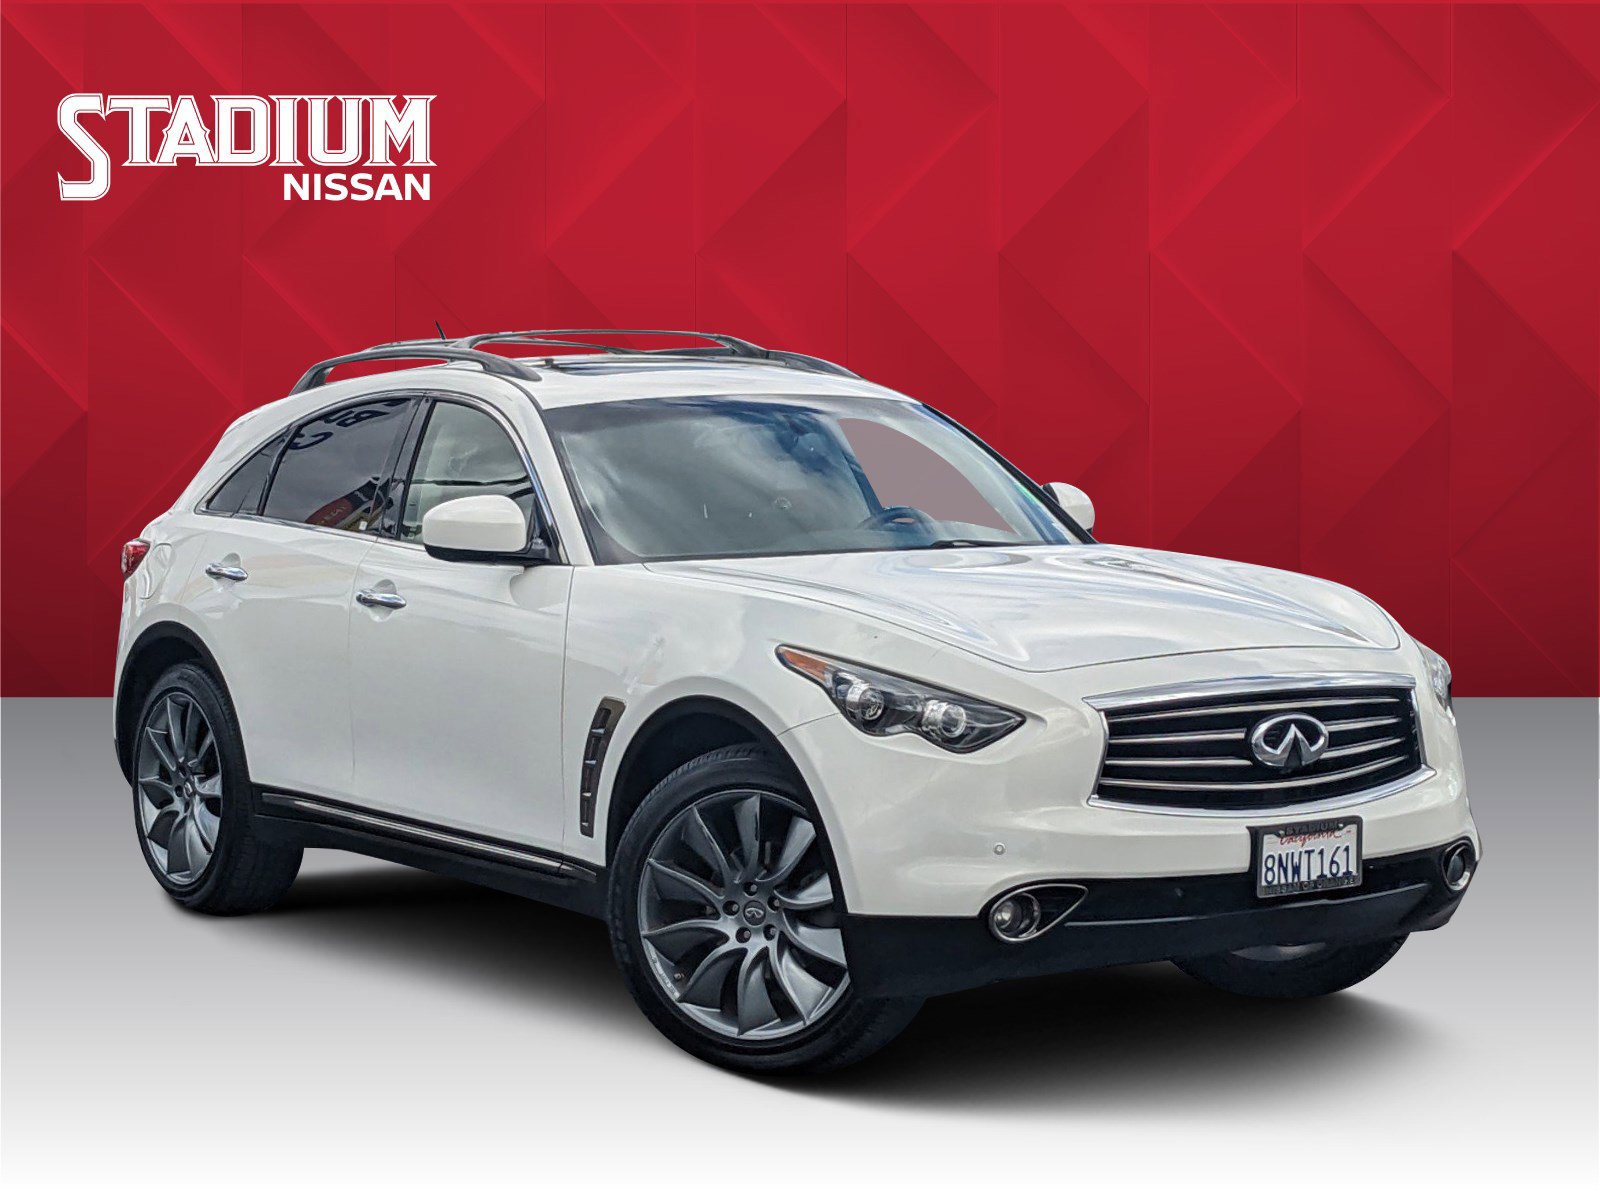 Used 2013 INFINITI FX37 for Sale Right Now - Autotrader